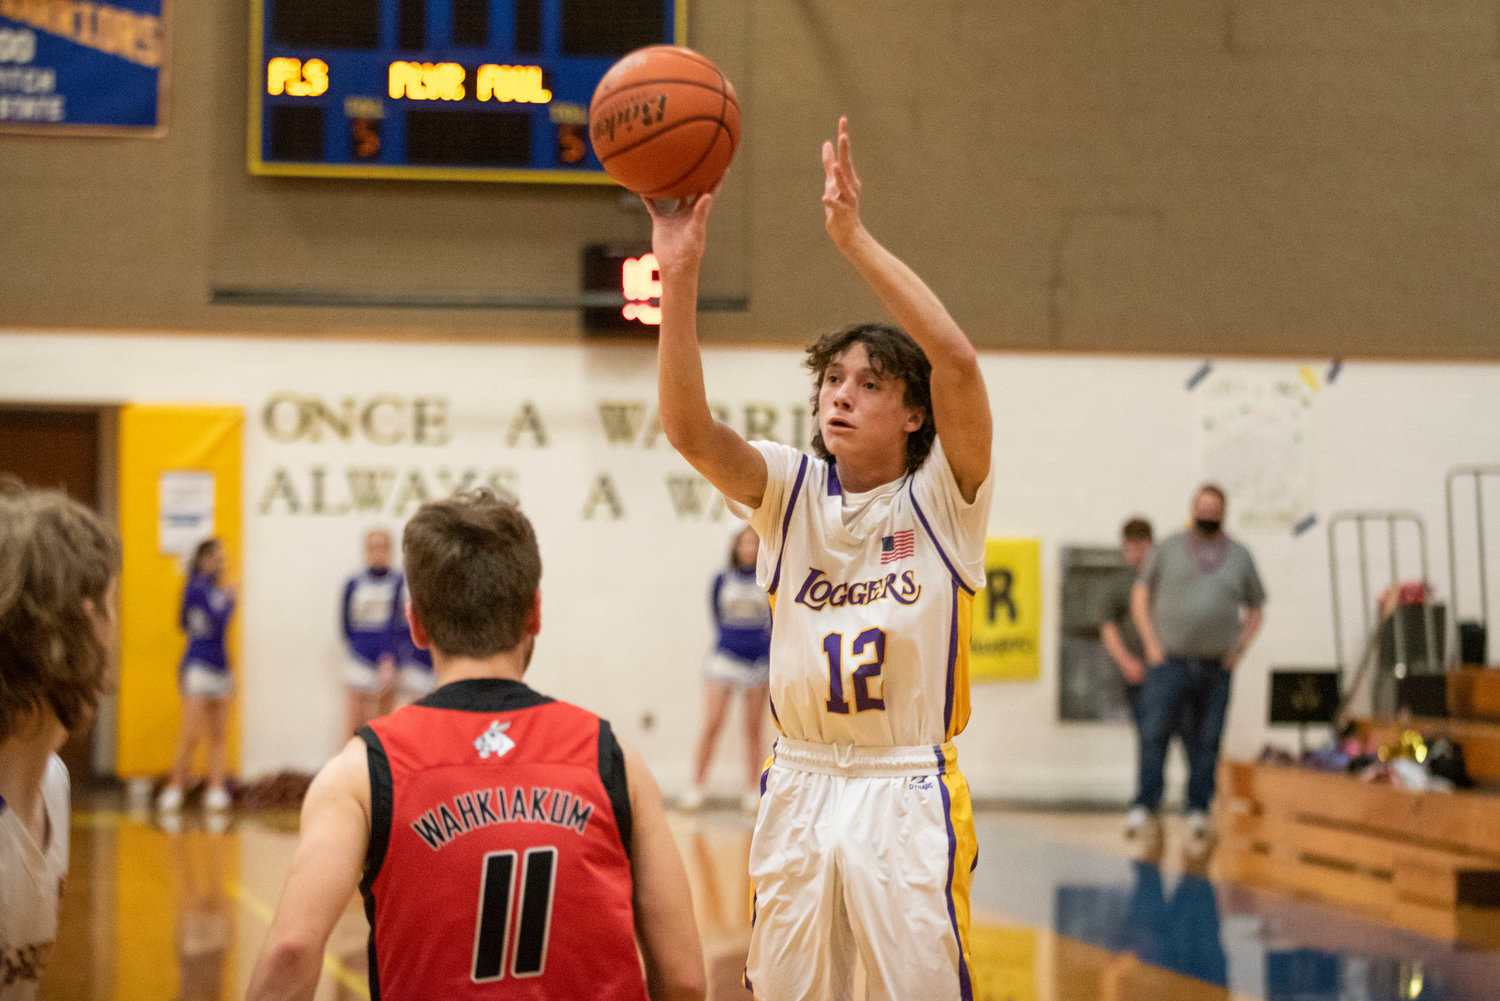 Onalaska senior Mason Ulery (12) shoots a 3-pointer in a loss to Wahkiakum in the district playoffs on Feb. 9 at Rochester High School.